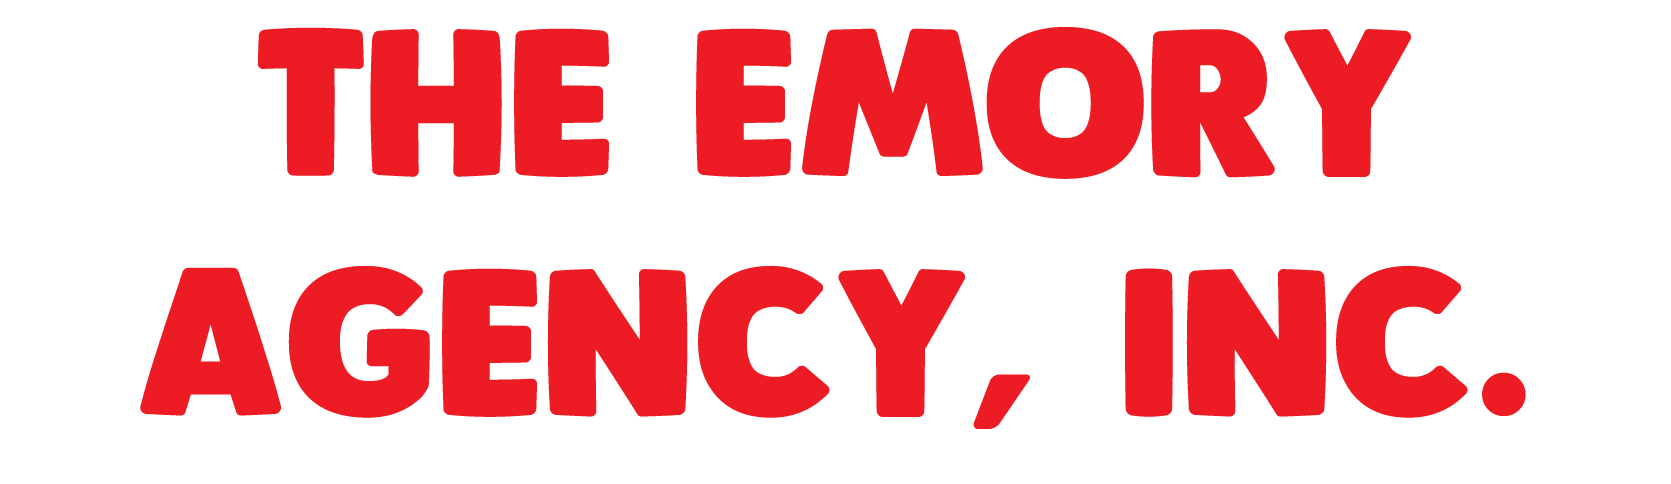 The Emory Agency